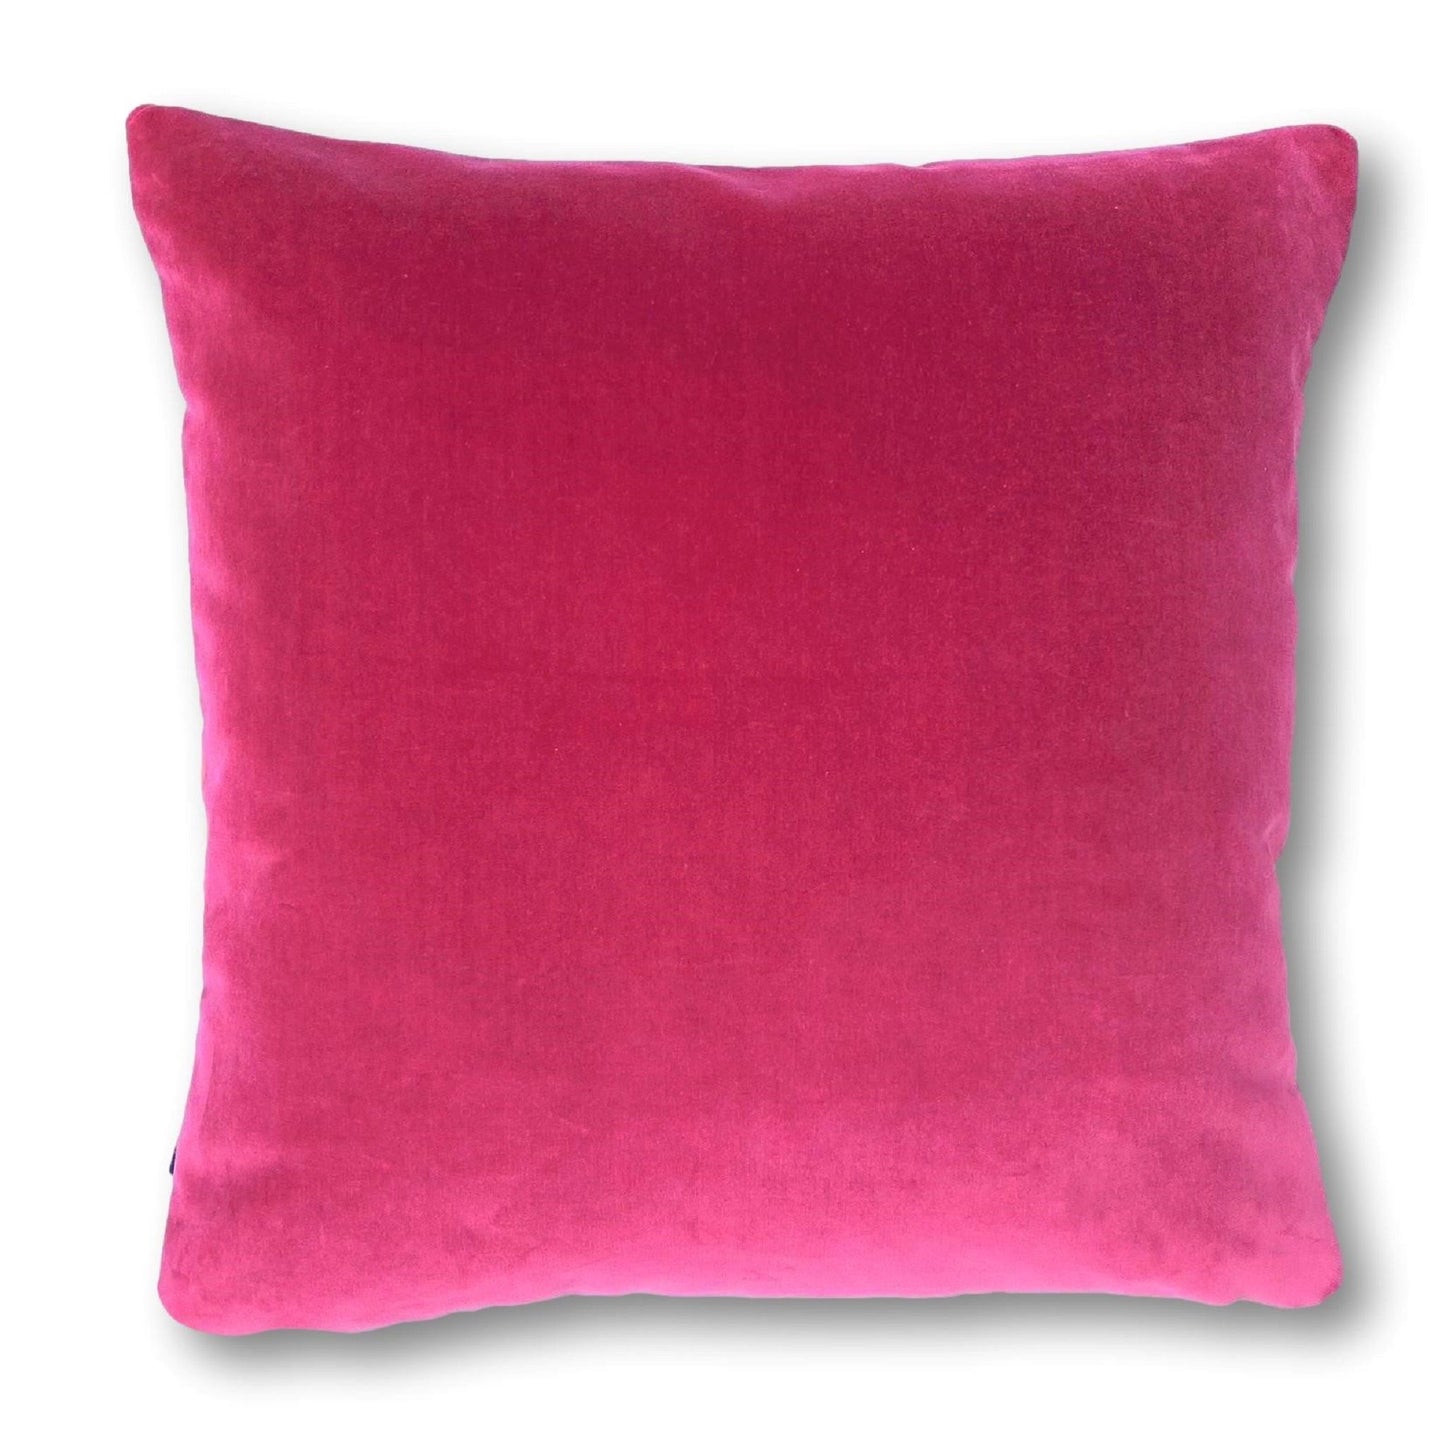 Bright Pink Velvet Cushion Cover with Duck Egg